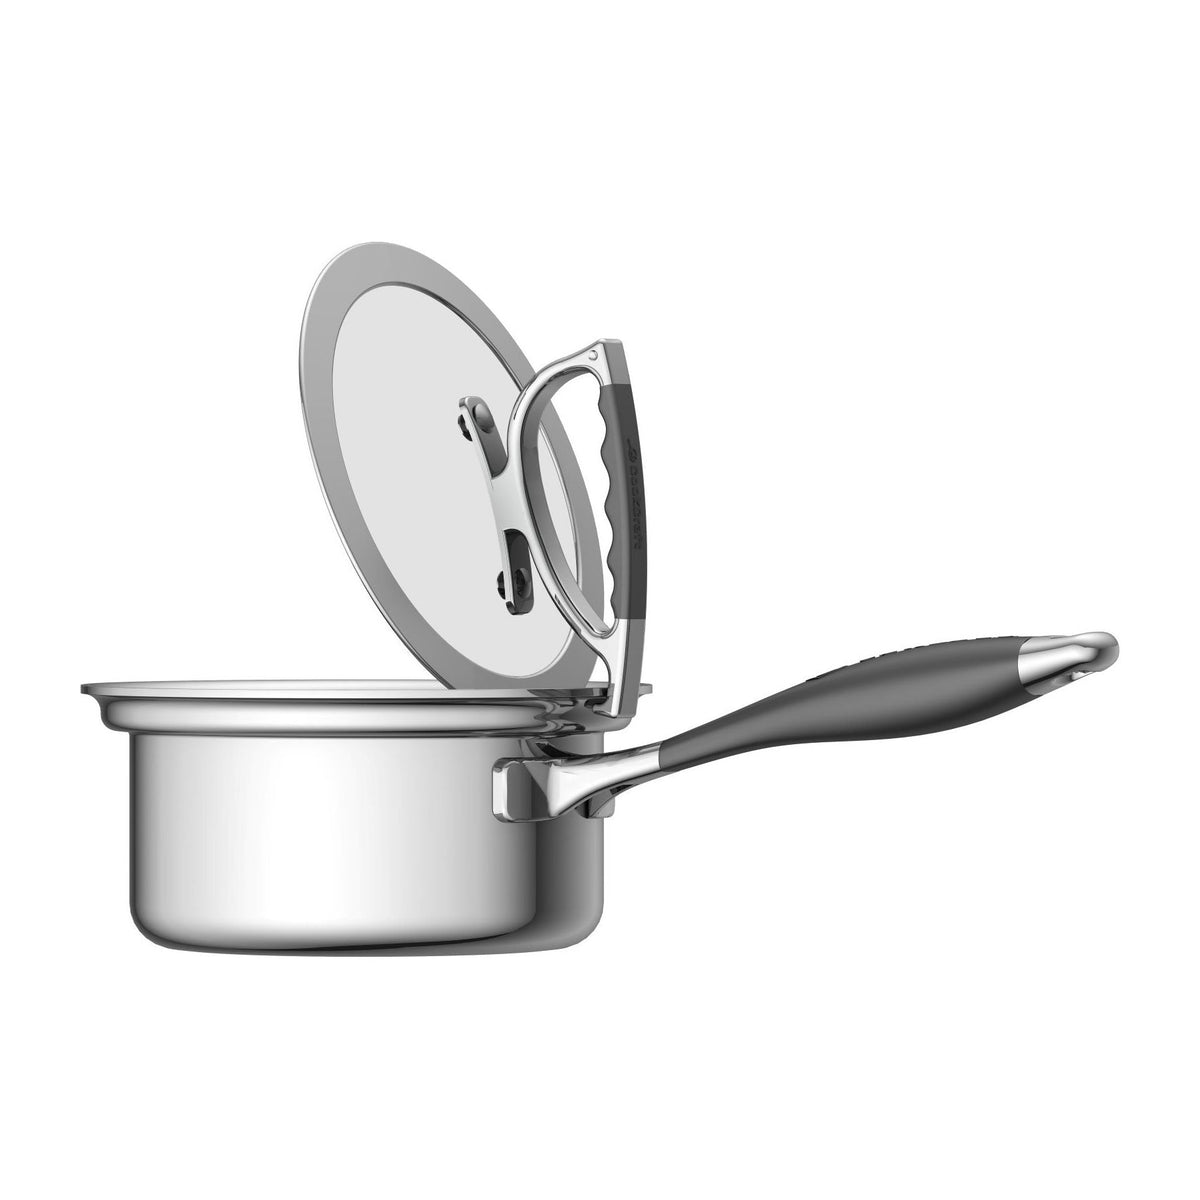 Stainless Steel Saucepan with Glass Lid, Multipurpose 1.5 Quart Sauce pan  Sauce Pot with Straining Cover & Pour Spouts for Boiling Milk, Sauce